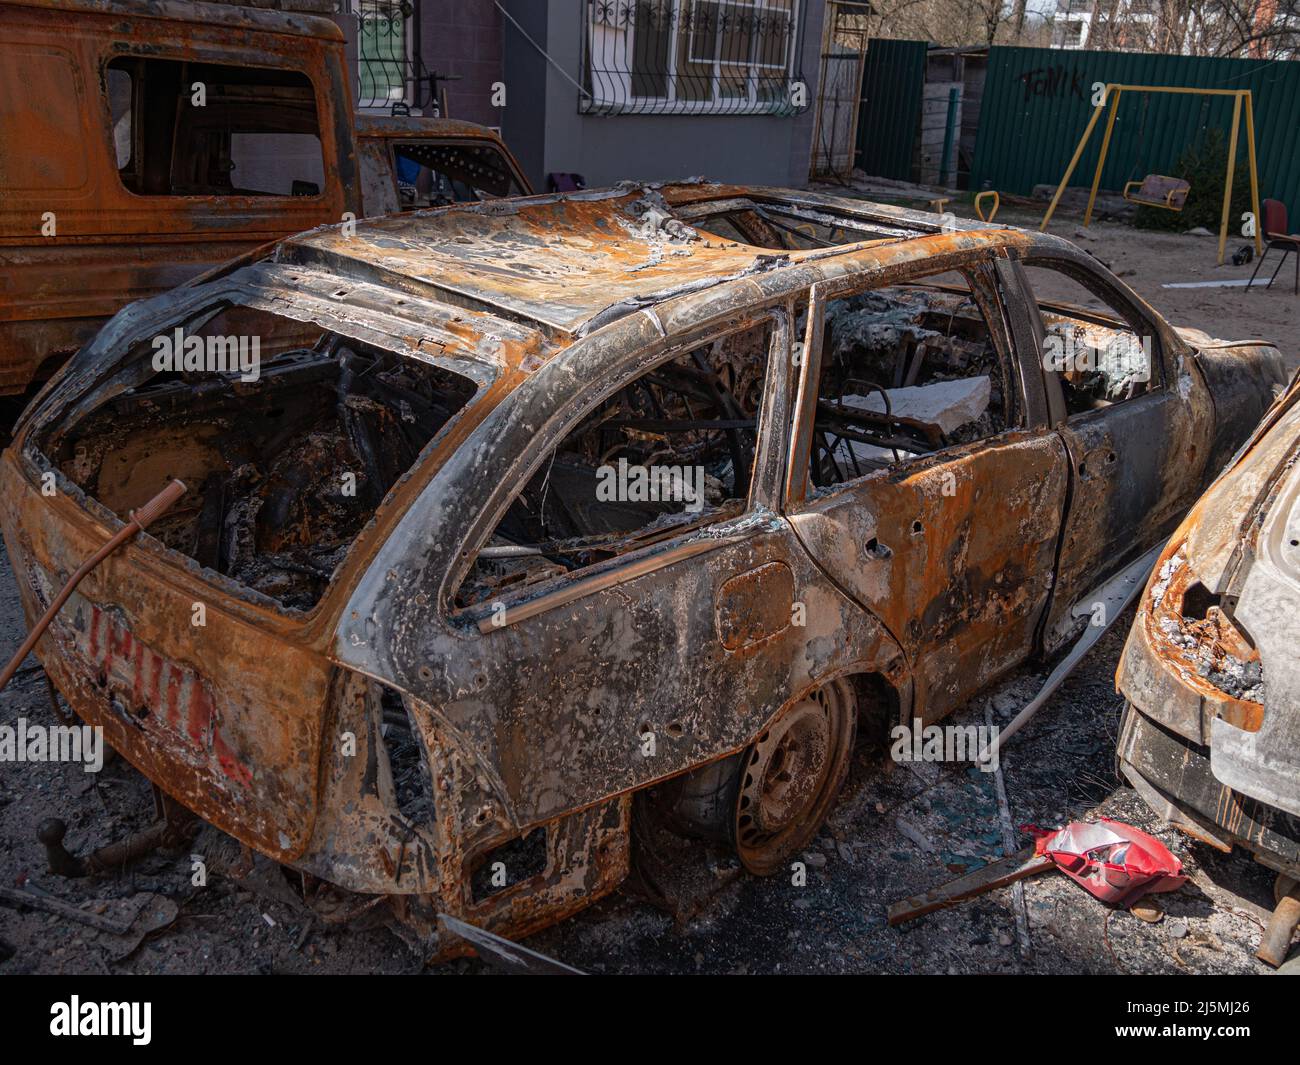 Irpin, Ukraine - April 2022: Burned cars as a result of the bombing of Irpin. Russian military aggression against Ukraine. Missile strike on residential district. Burnt cars on city streets Stock Photo